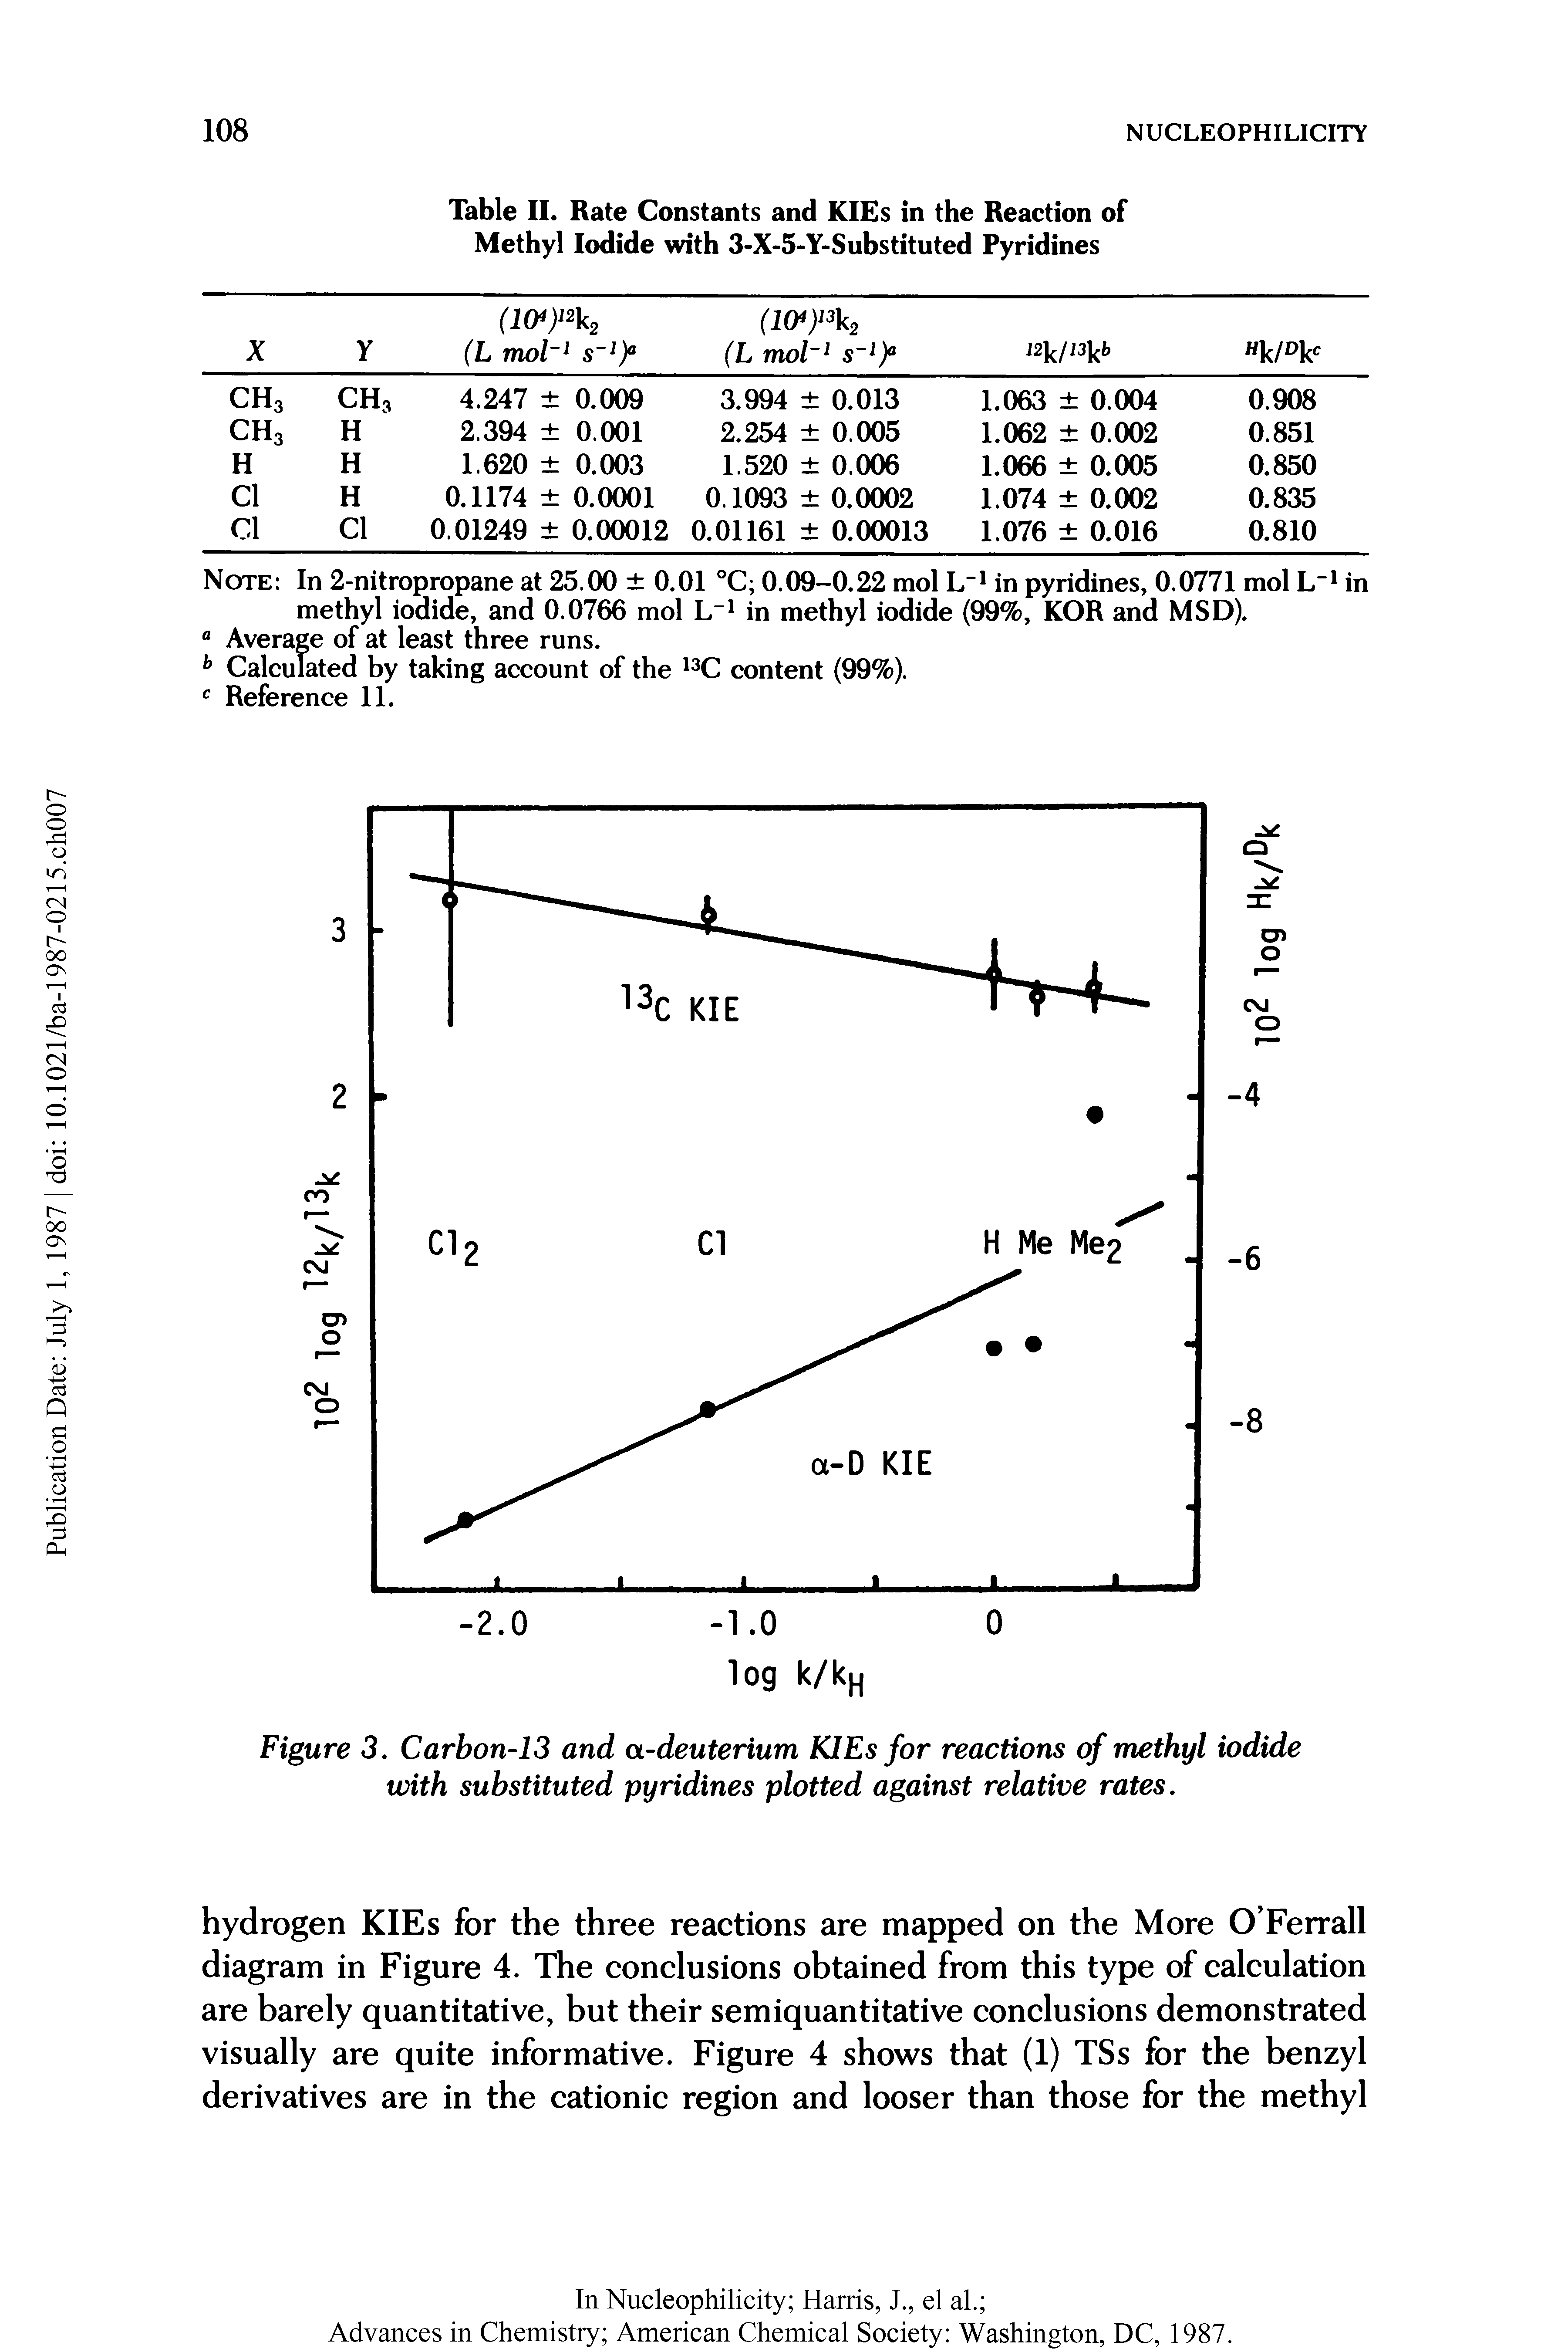 Figure 3. Carbon-13 and a-deuterium KIEs for reactions of methyl iodide with substituted pyridines plotted against relative rates.